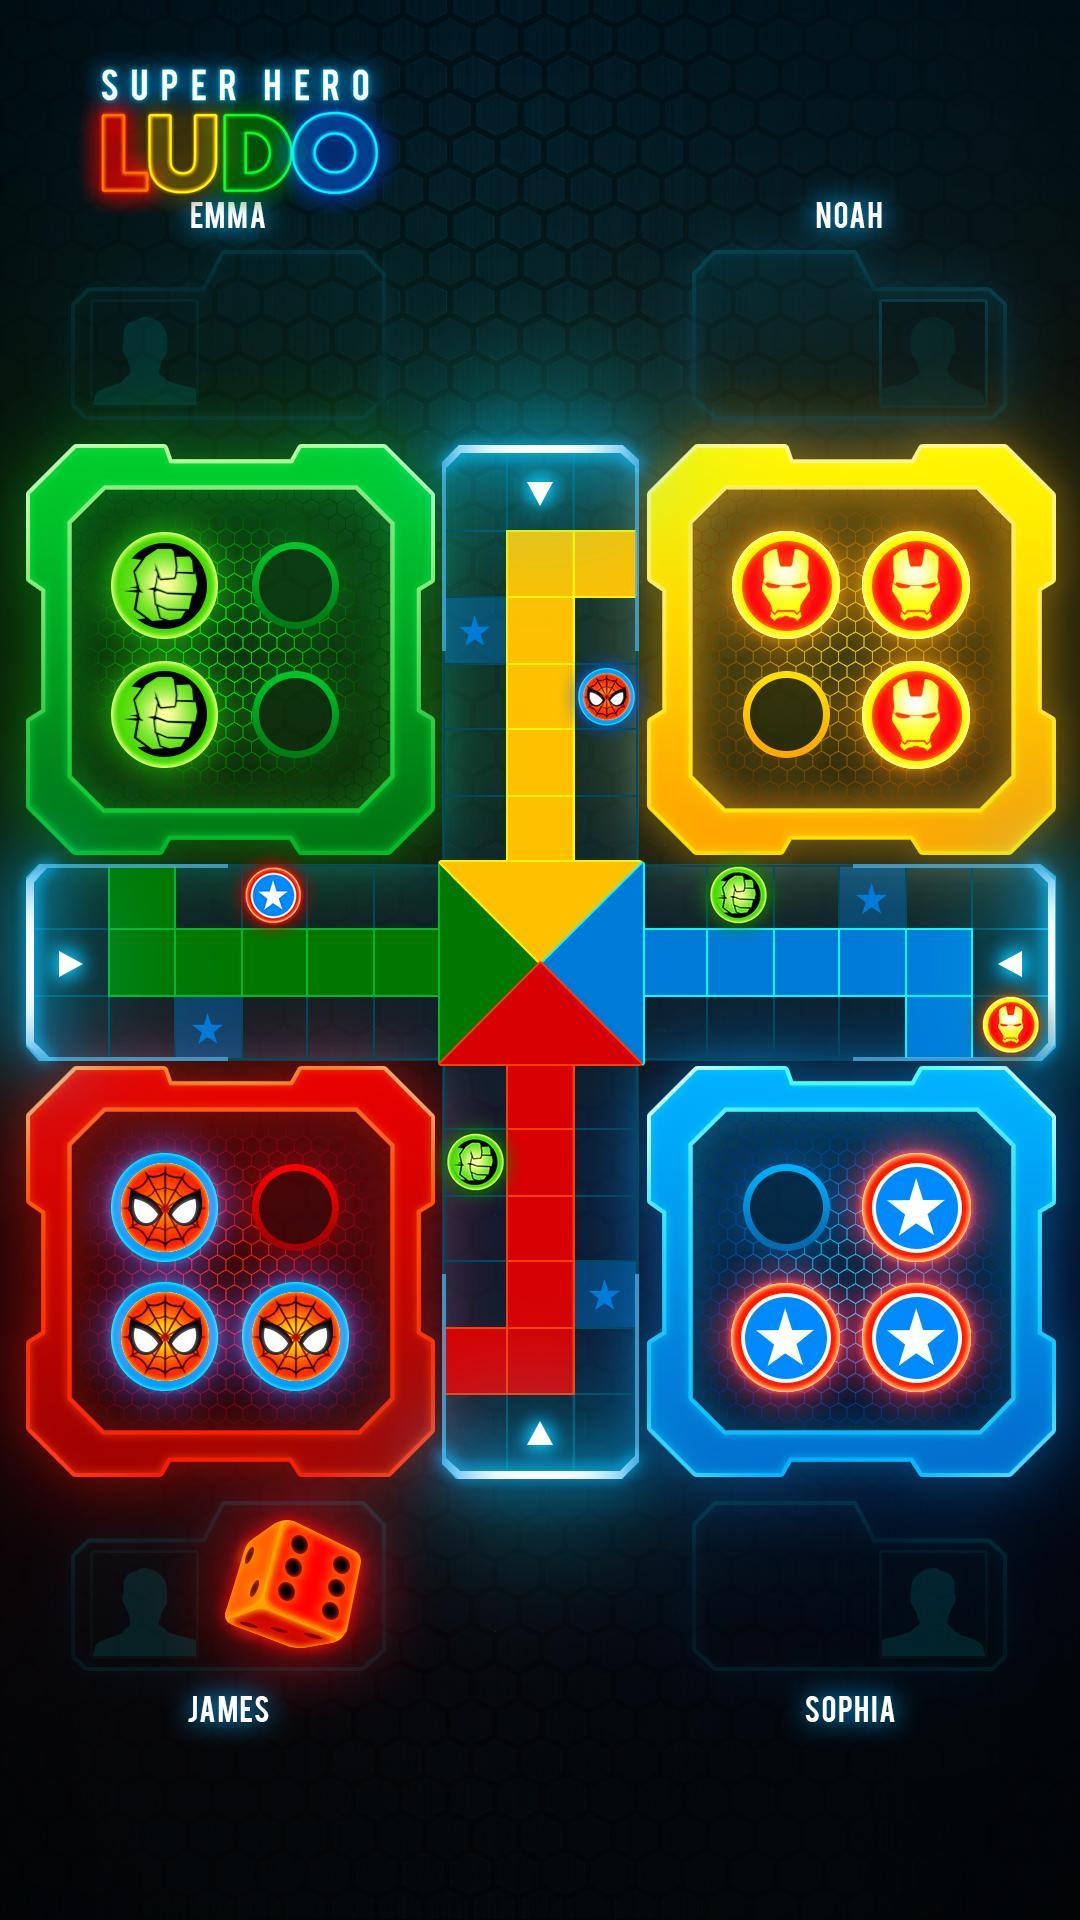 Super Hero Ludo Avenger Ludoboard Game Apk For Android Download